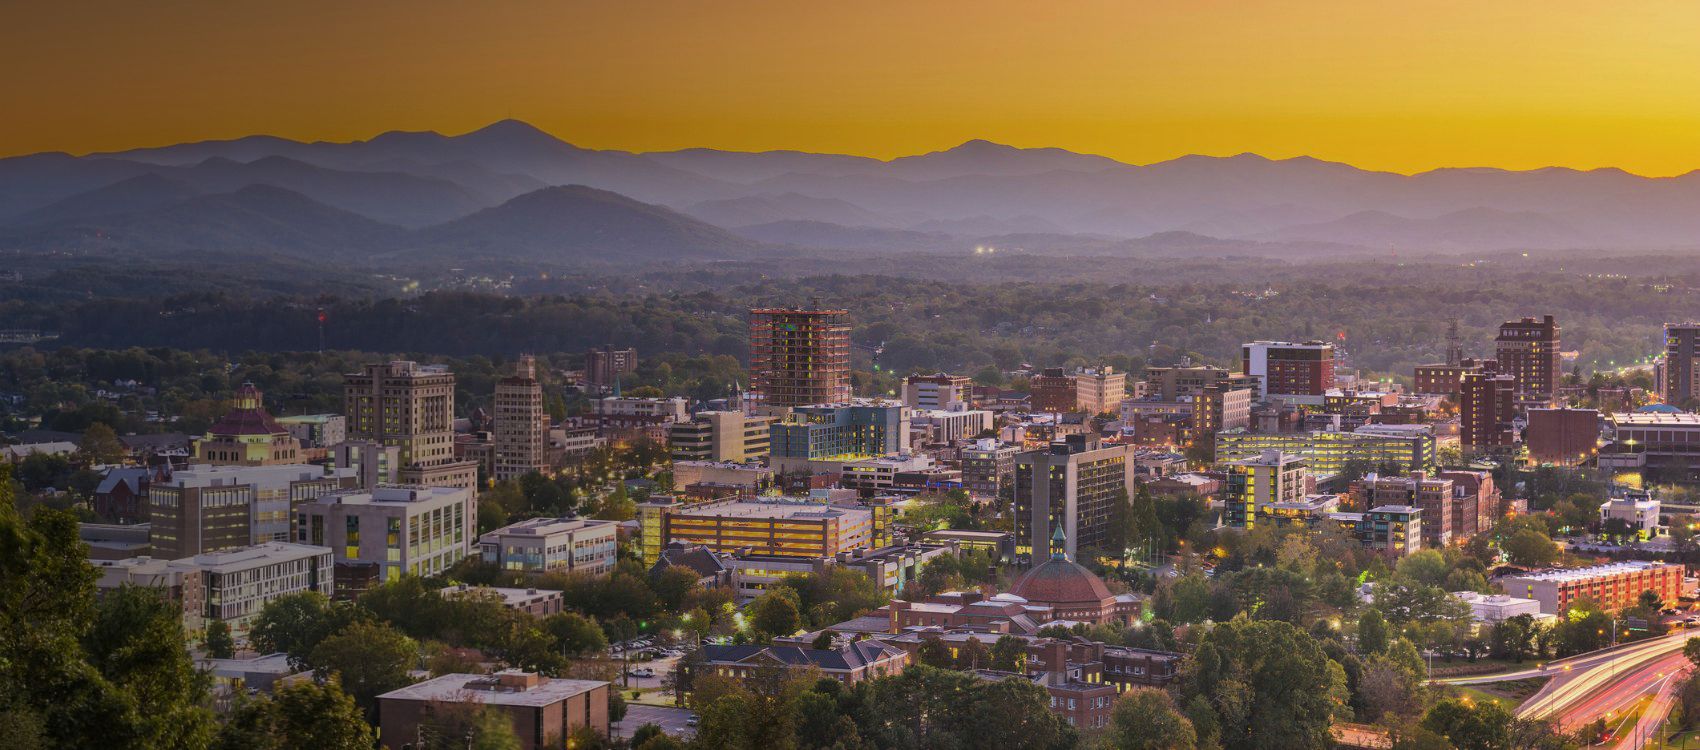 asheville north carolina city buildings in the foreground with blue ridge mountains in back